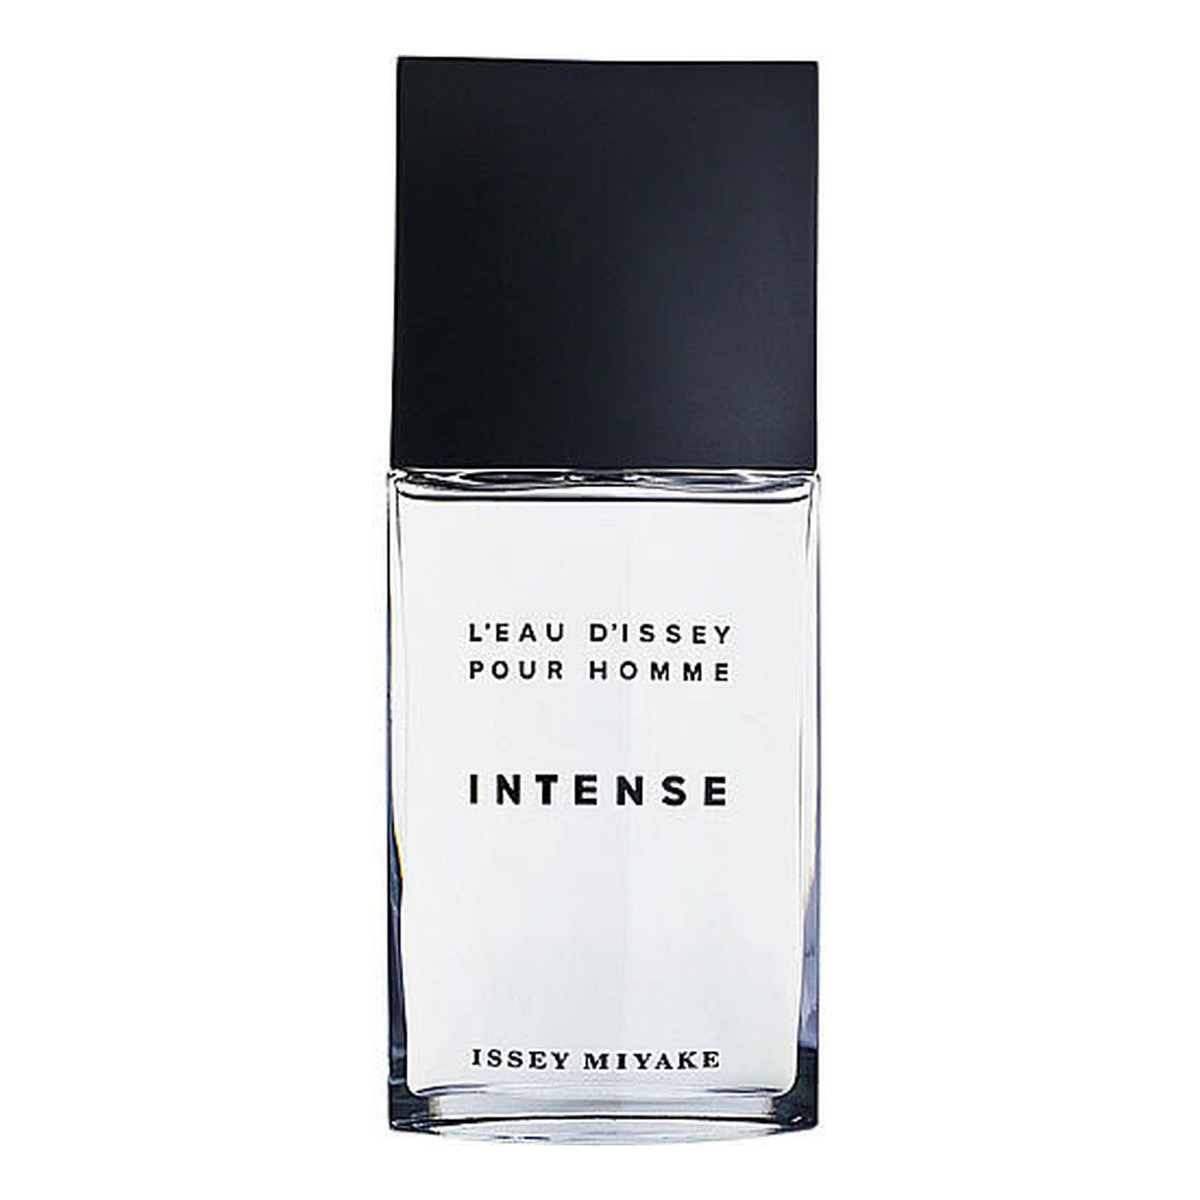 Issey Miyake L'eau d'Issey pour Homme Intense Woda toaletowa spray tester 125ml